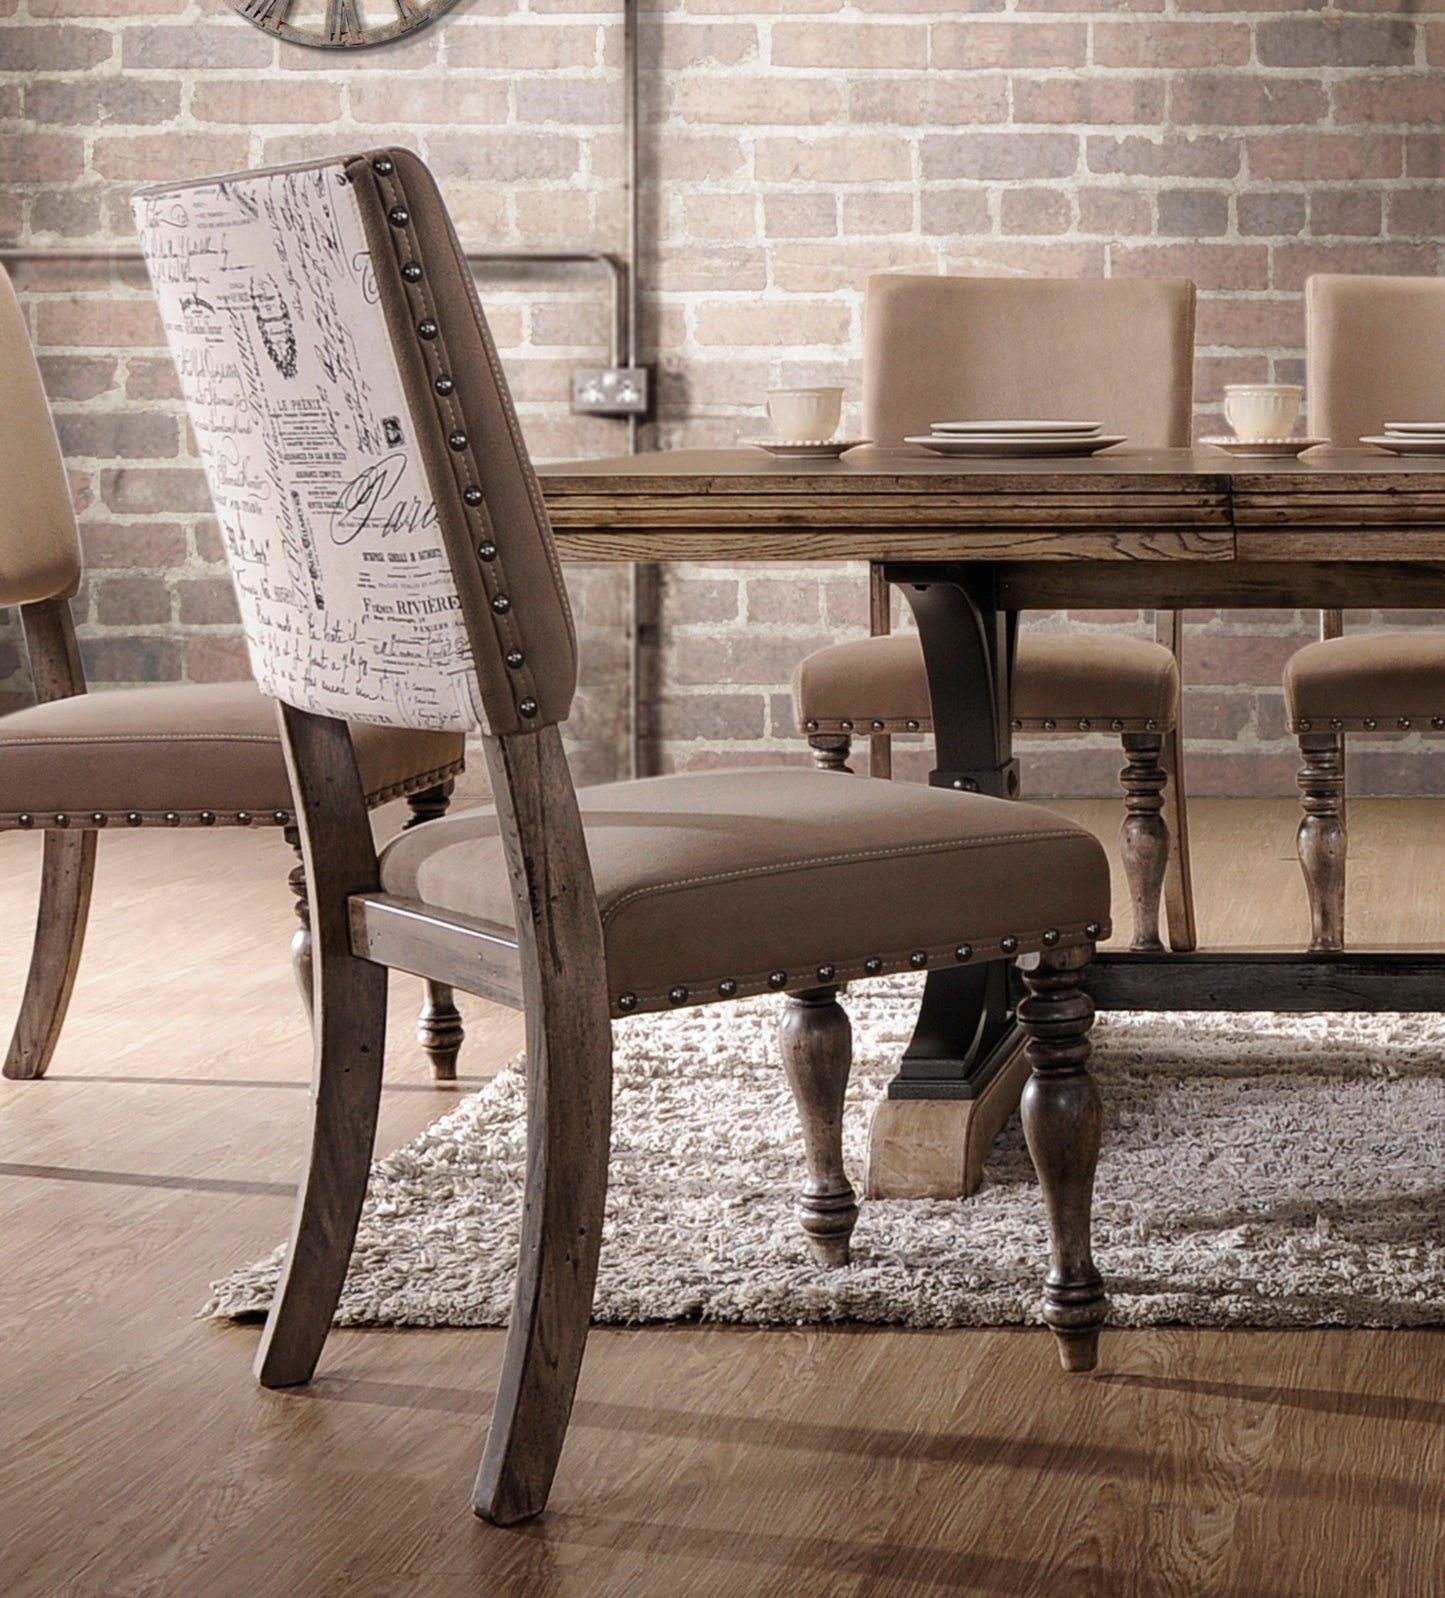 Birmingham 9-piece Driftwood Finish Table with Nail Head Arm Chairs Dining Set